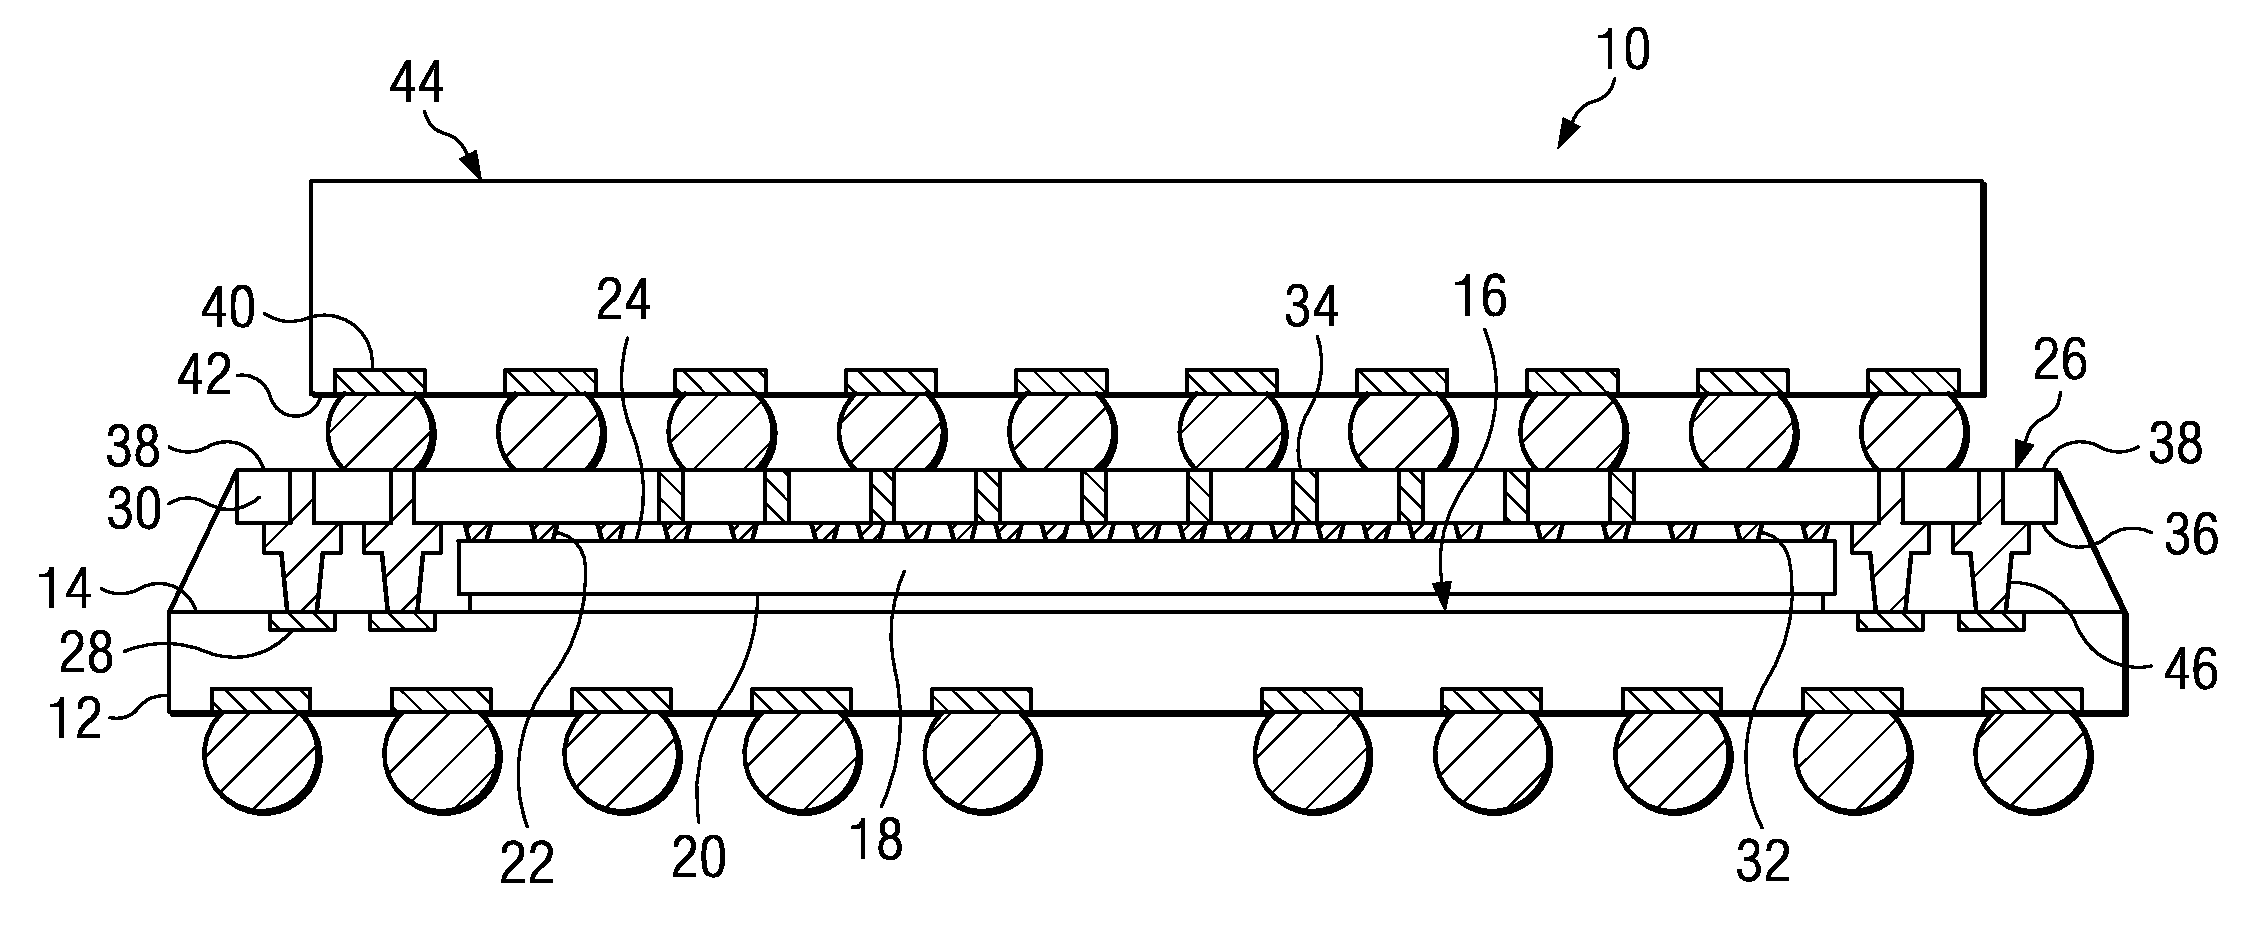 Package on Package Structure with thin film Interposing Layer